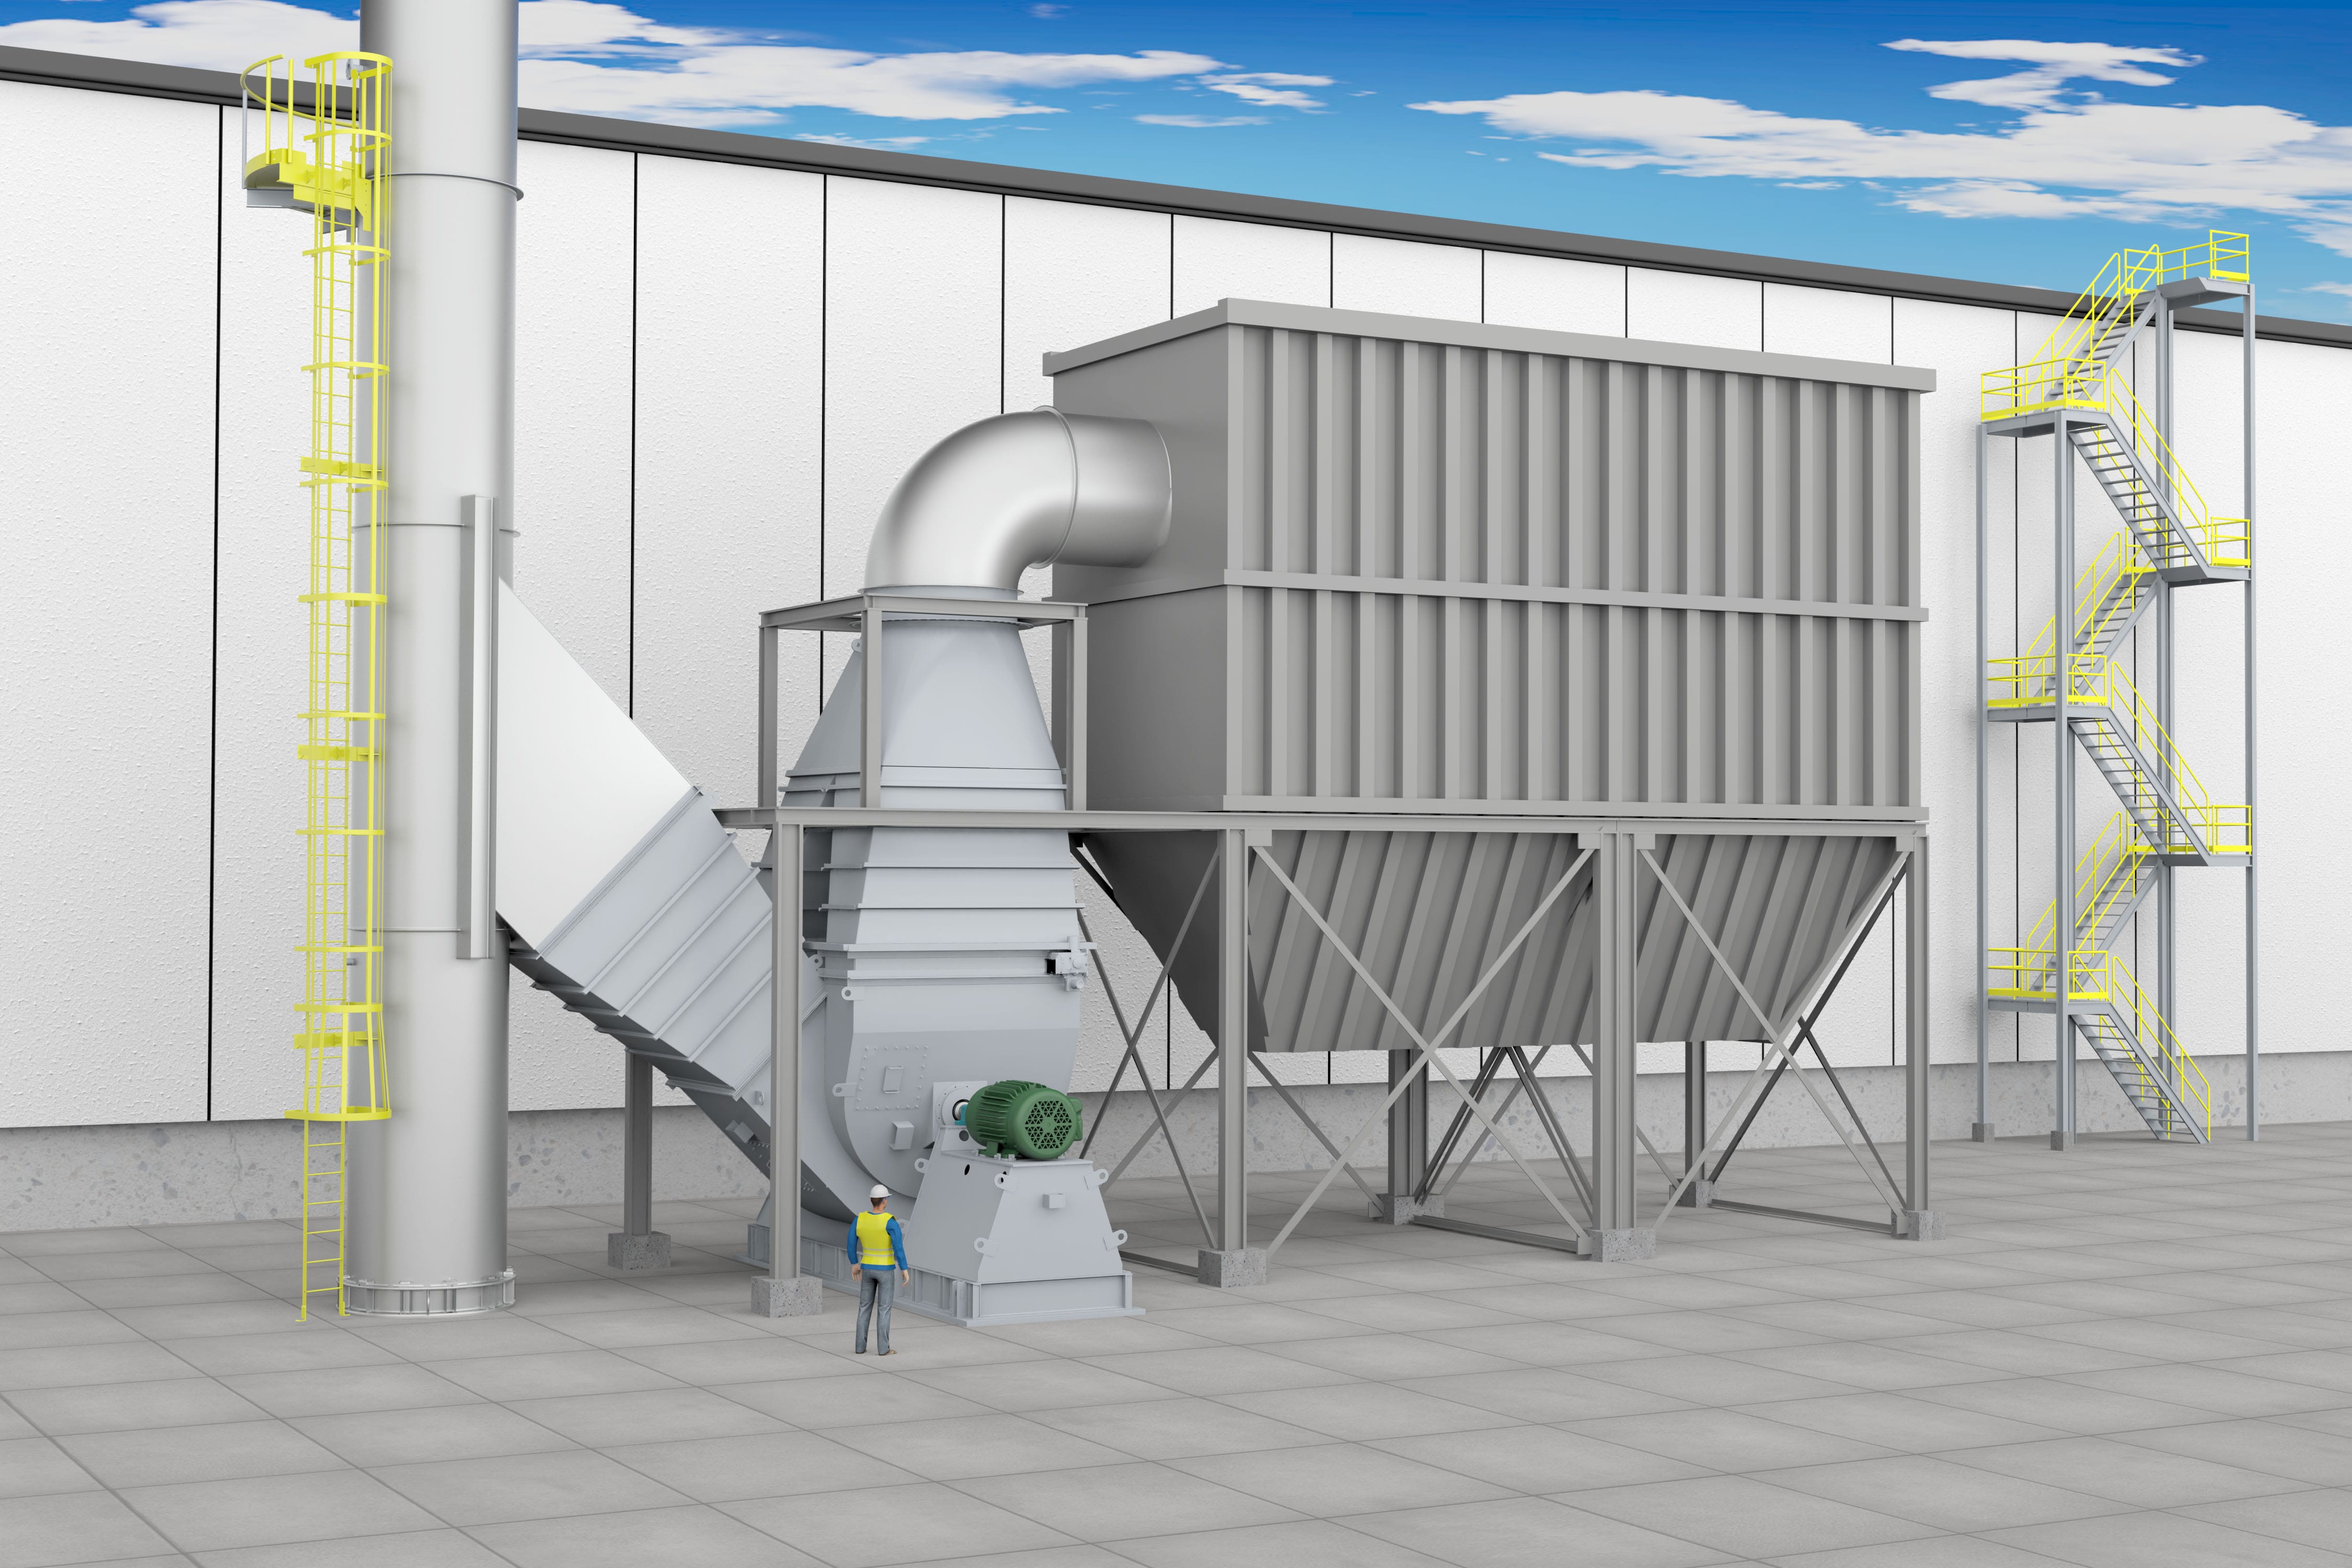 A Mechanical Dust Collector